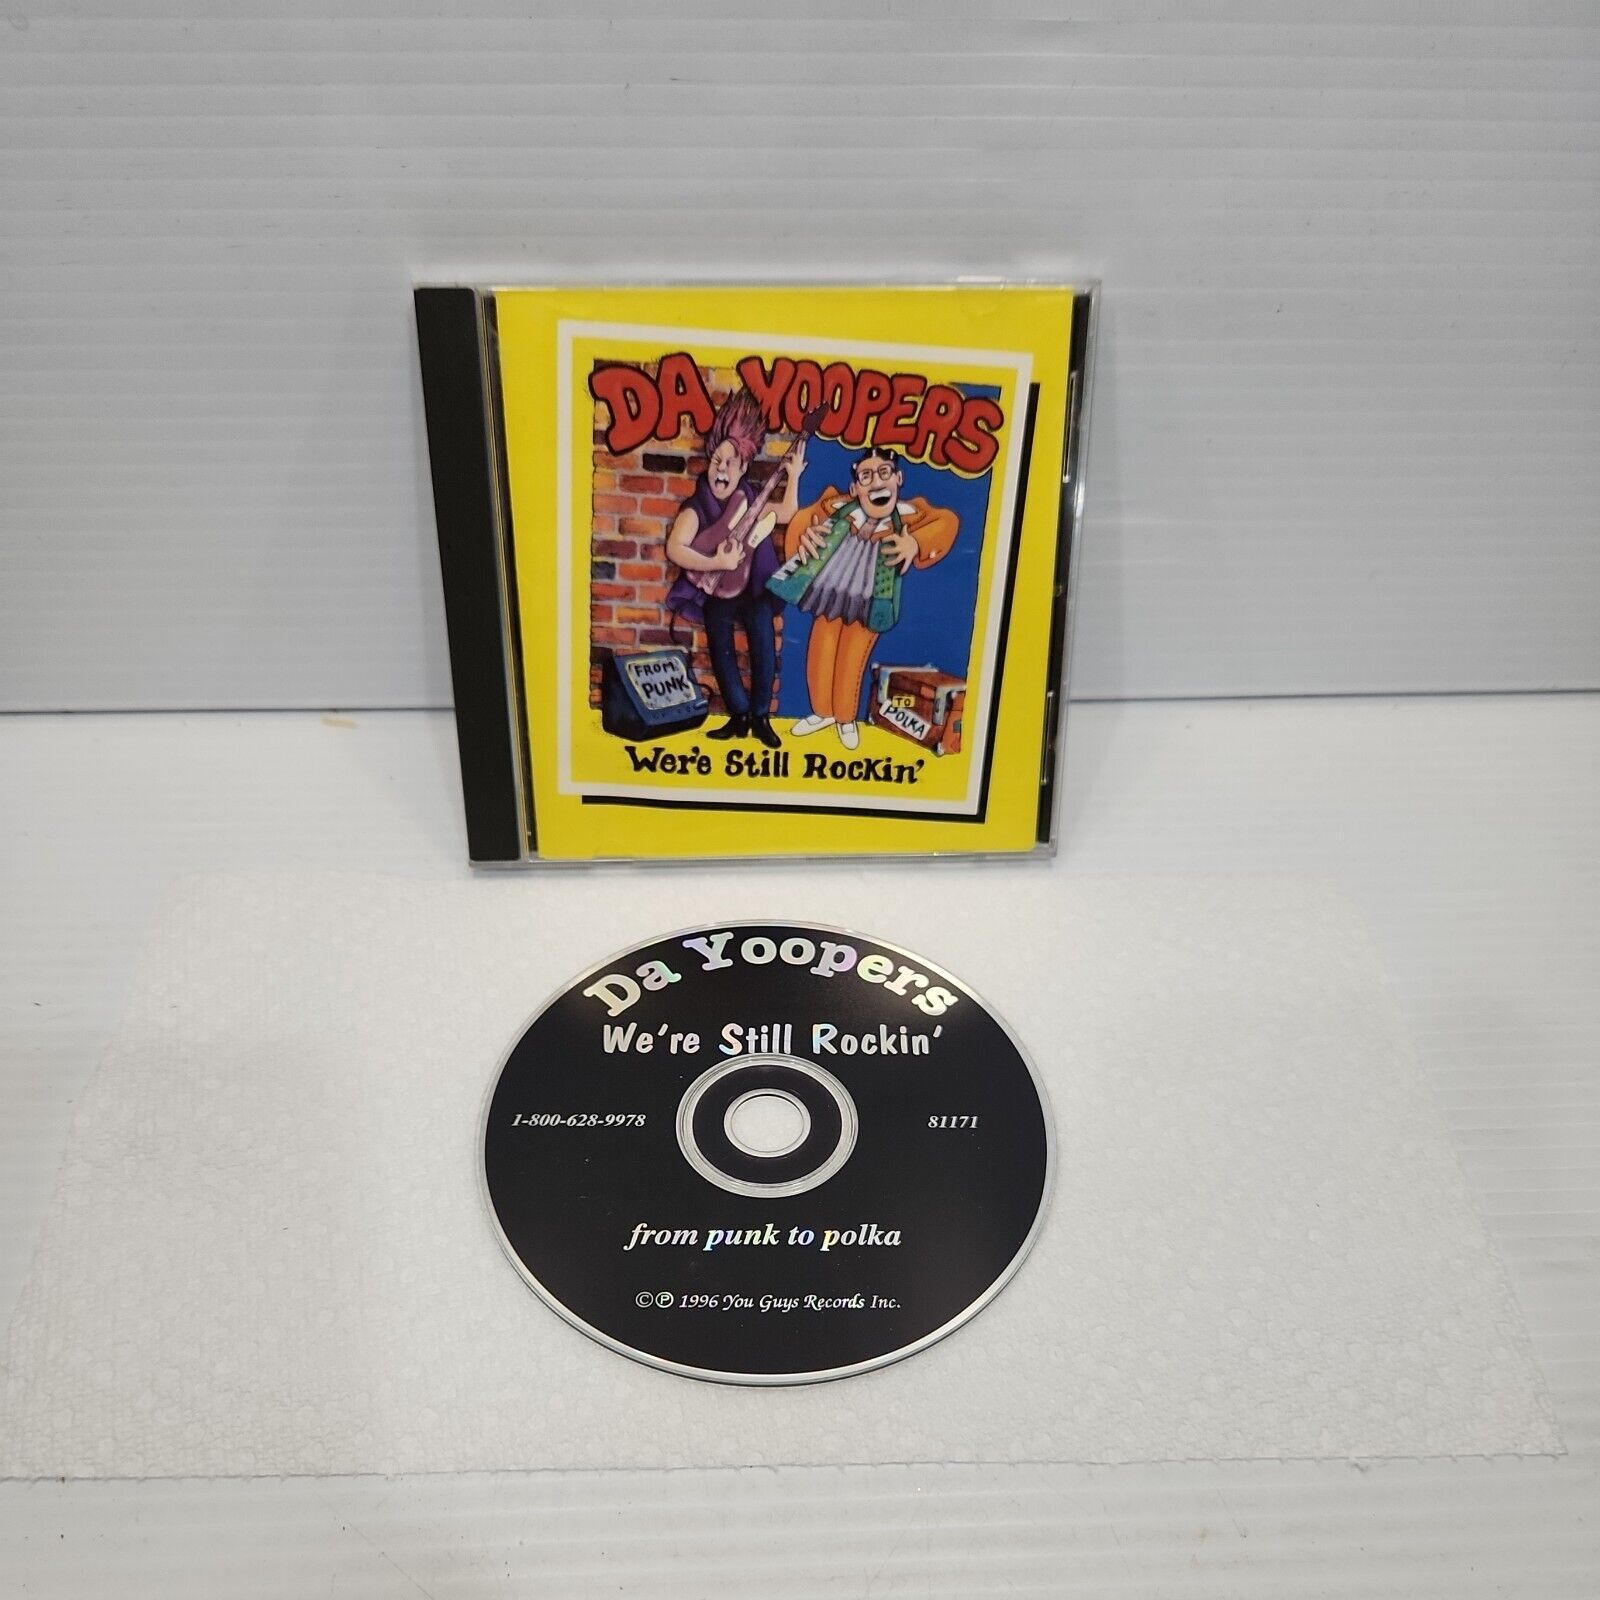 We're Still Rockin' by Da Yoopers CD (1996 You Guys) From Punk to Polka